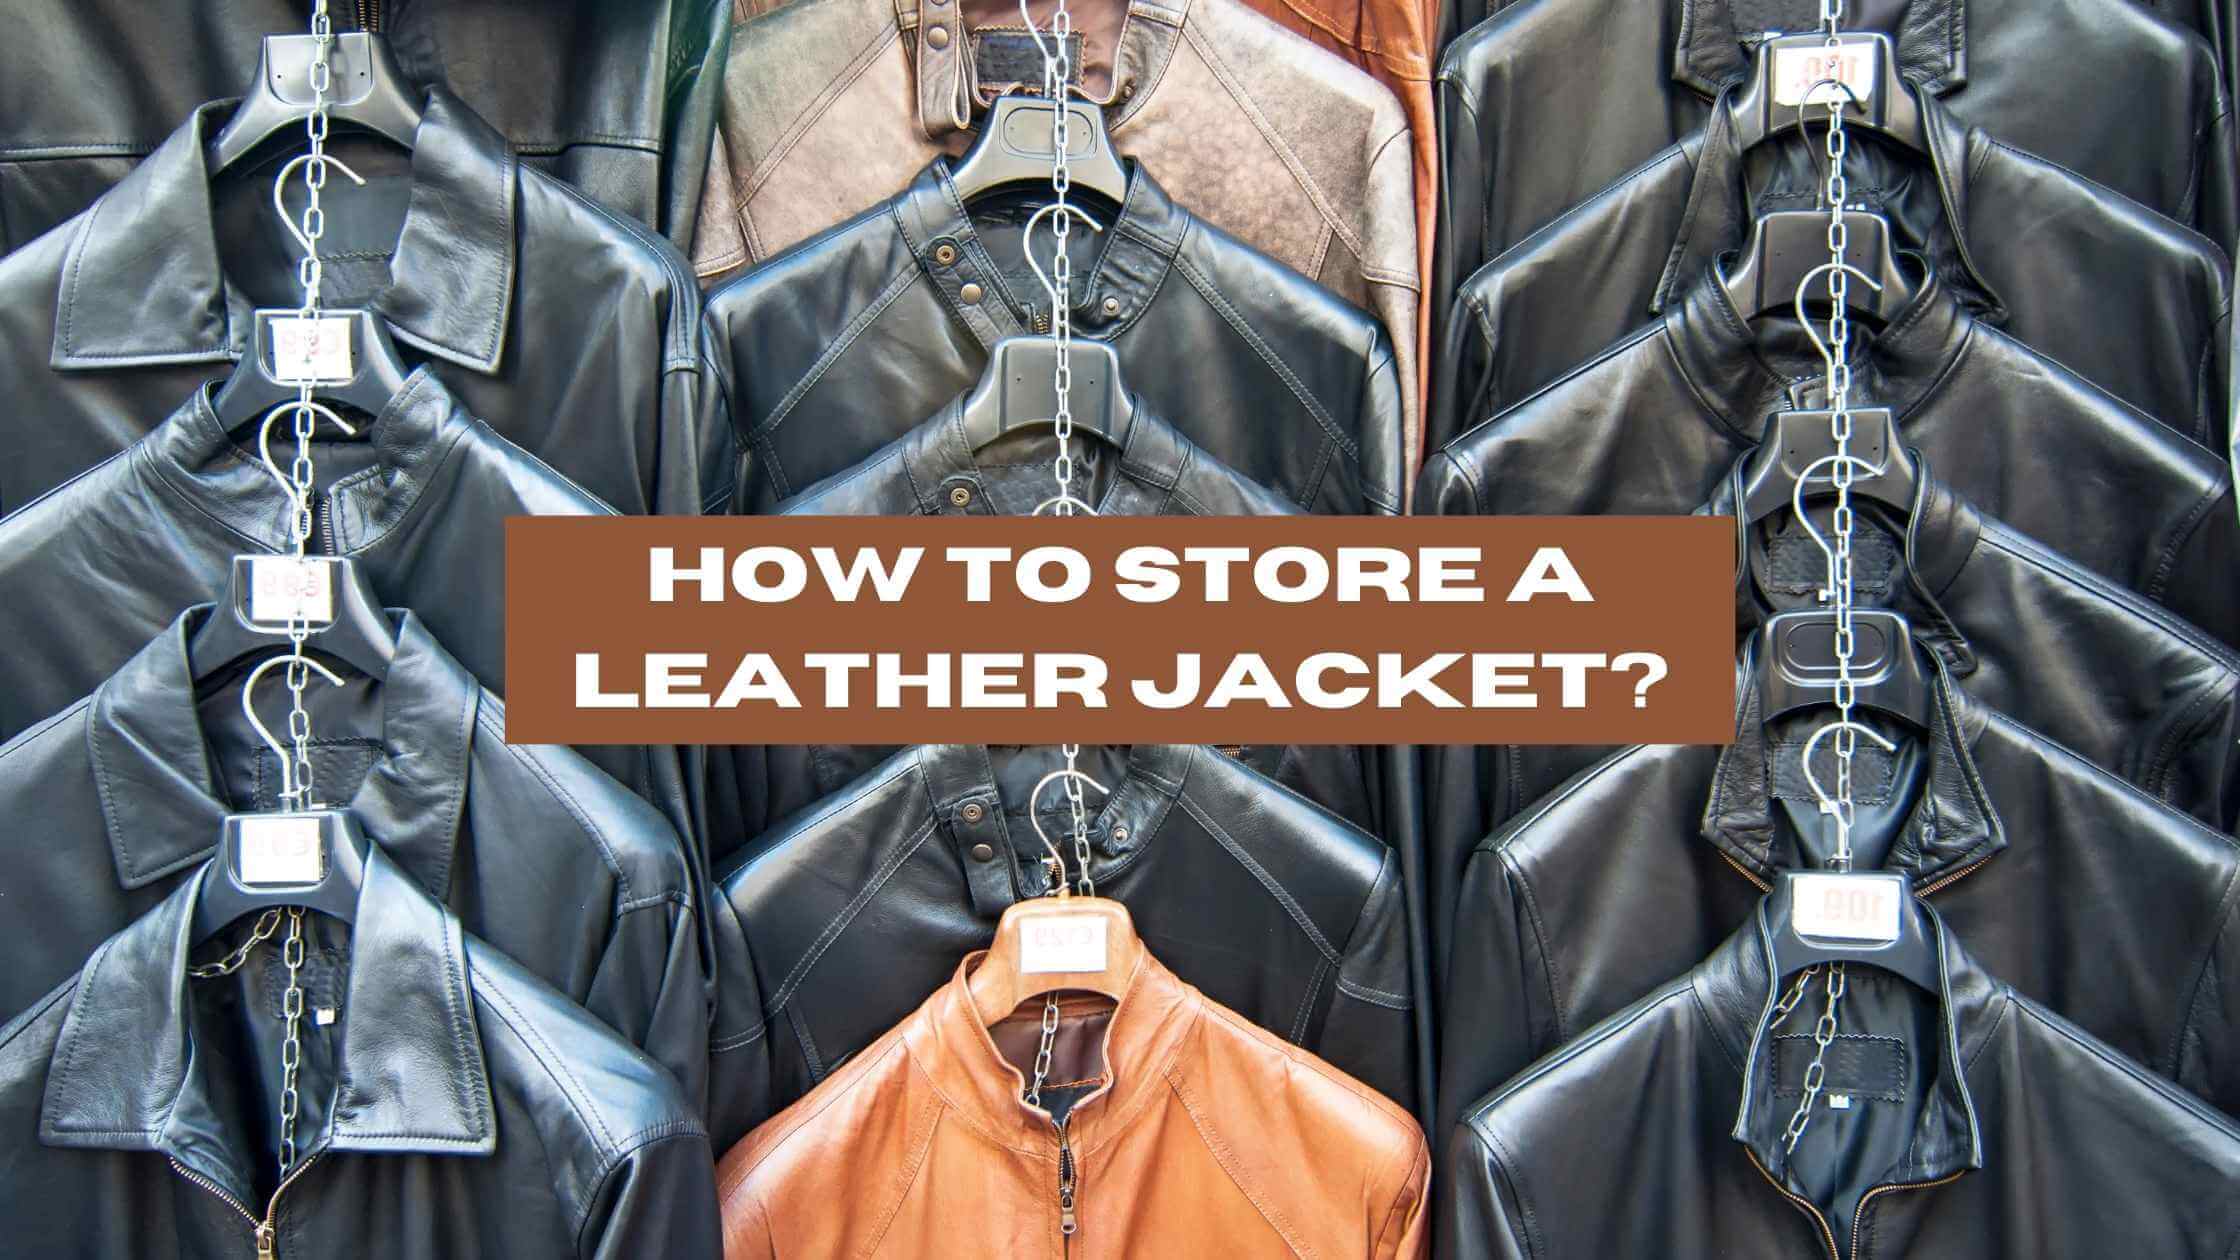 How to store a leather jacket.